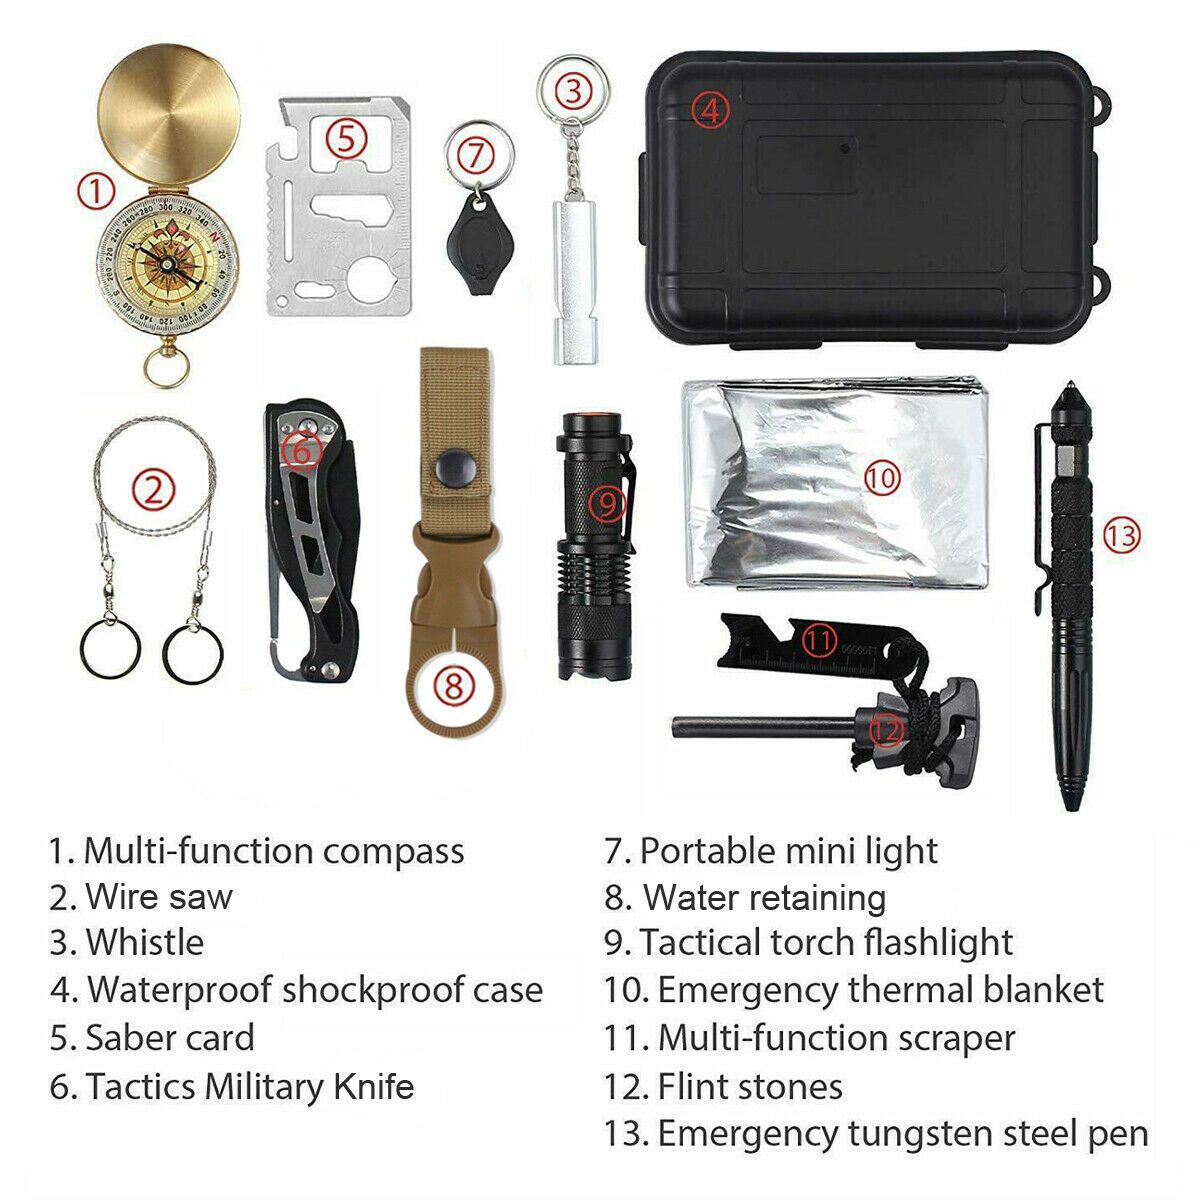 Outdoor survival kit: 15 must-have survival tools